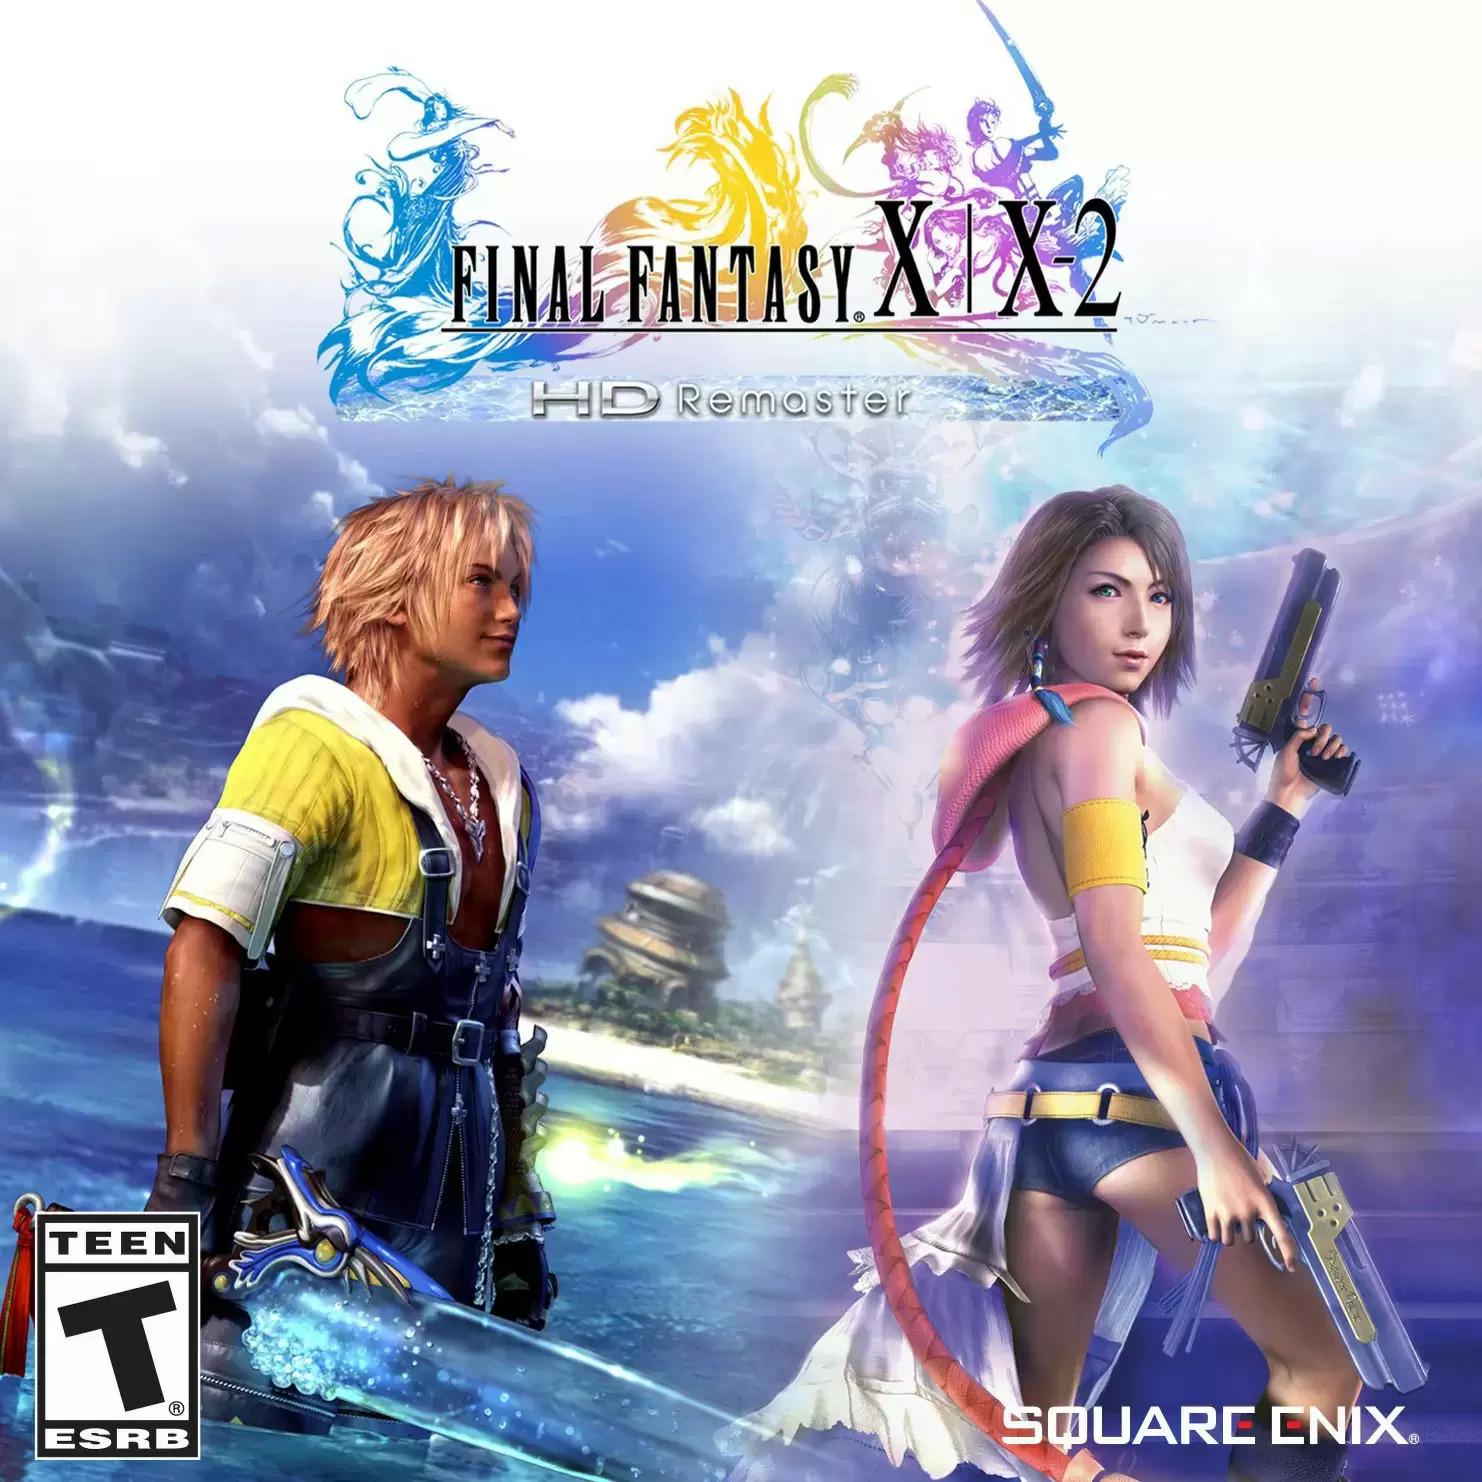 FINAL FANTASY X and X-2 HD Remaster Playstation for $9.99